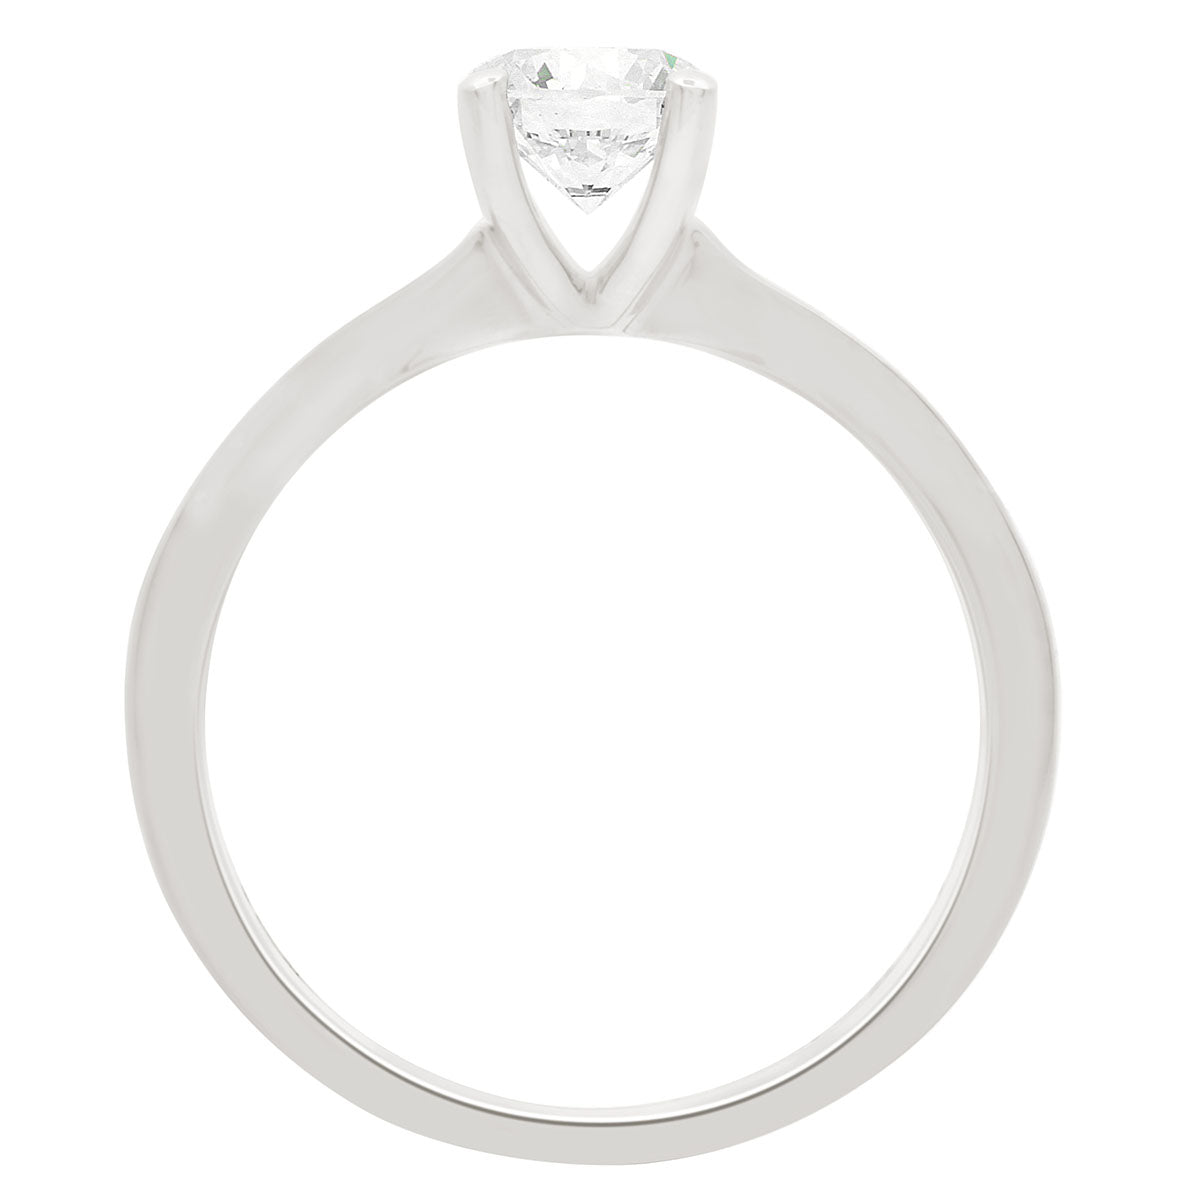 Channel Set Solitaire Ring made from platinum in an upright position